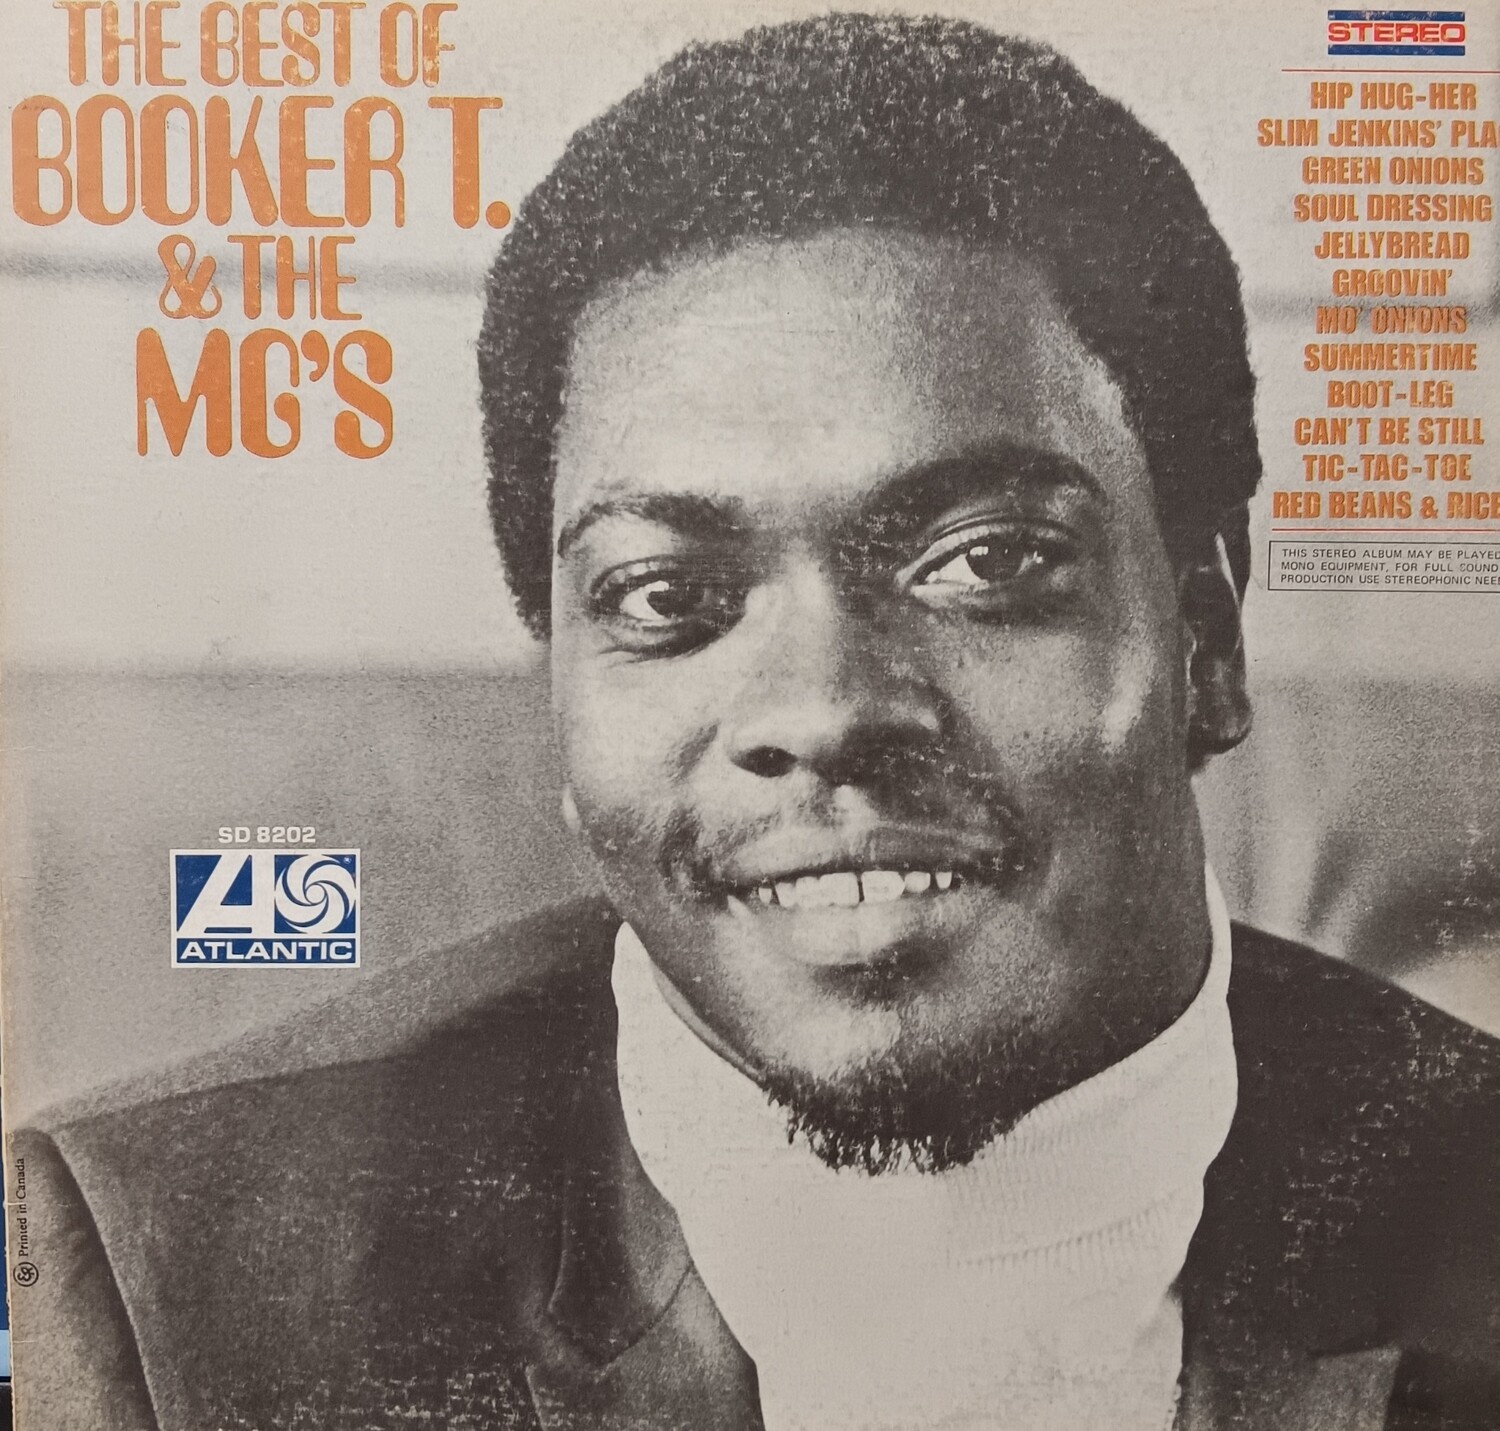 BOOKER T & THE MG'S - The Best of Booker T & The MG's